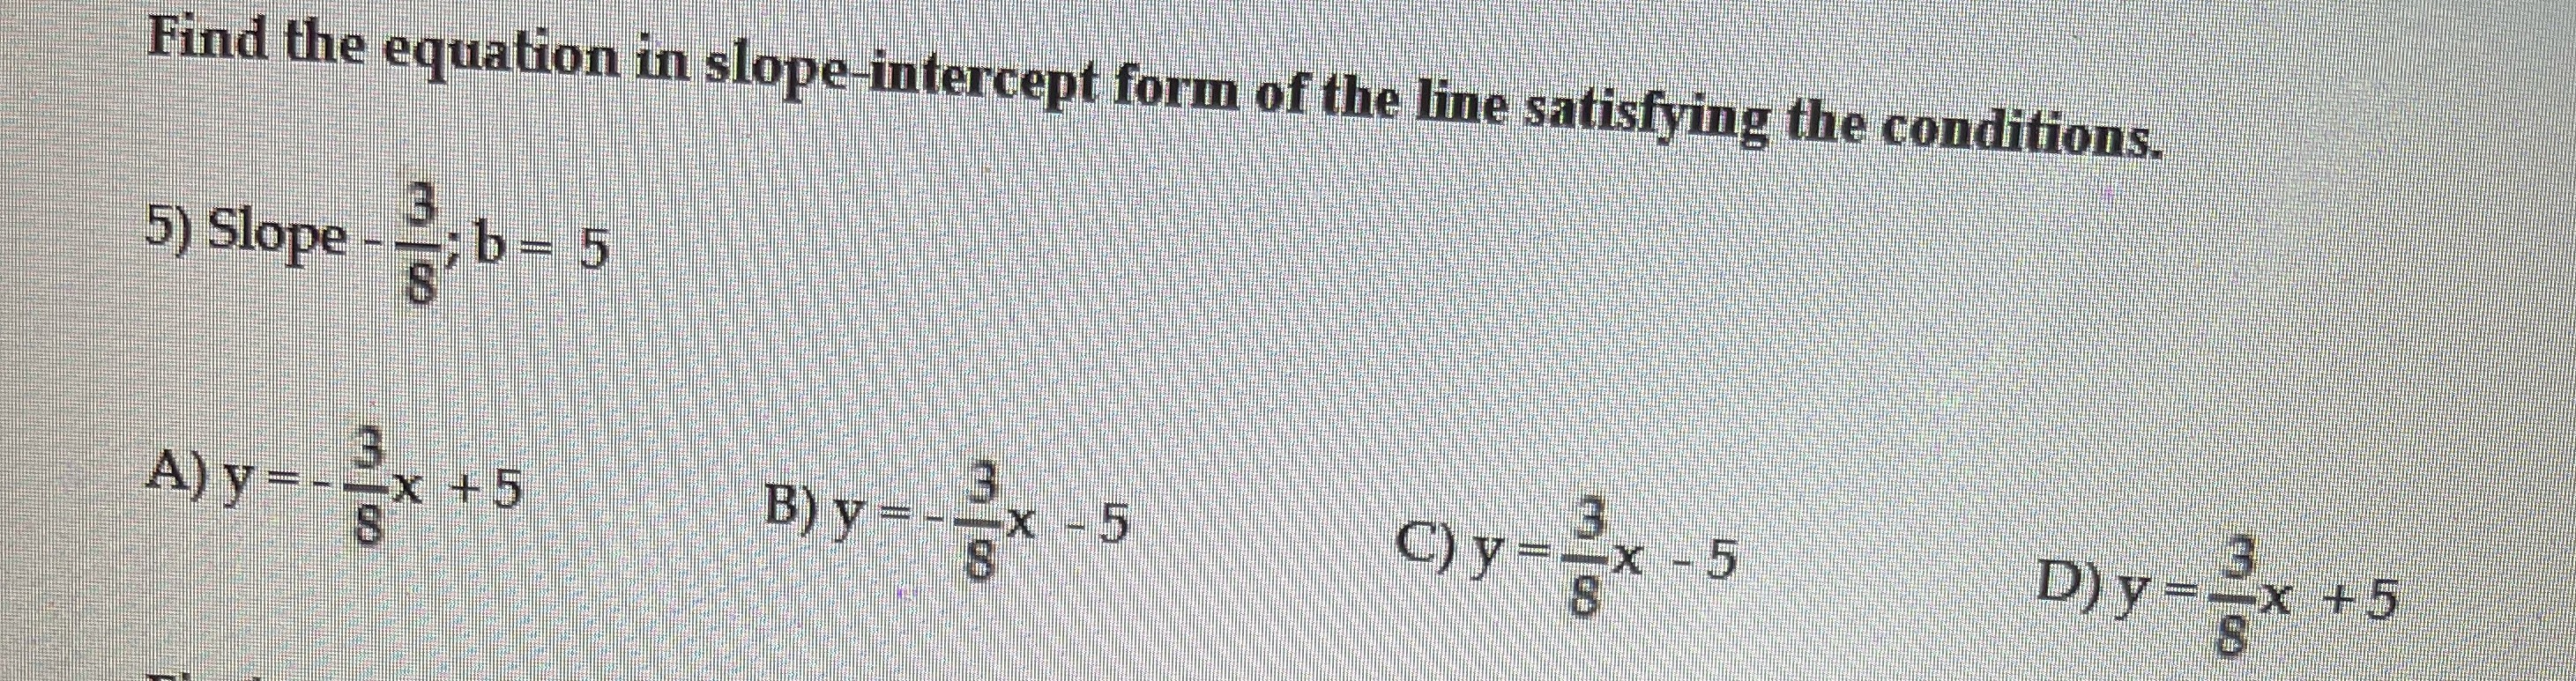 Find the equation in slope-intercept form of the l...